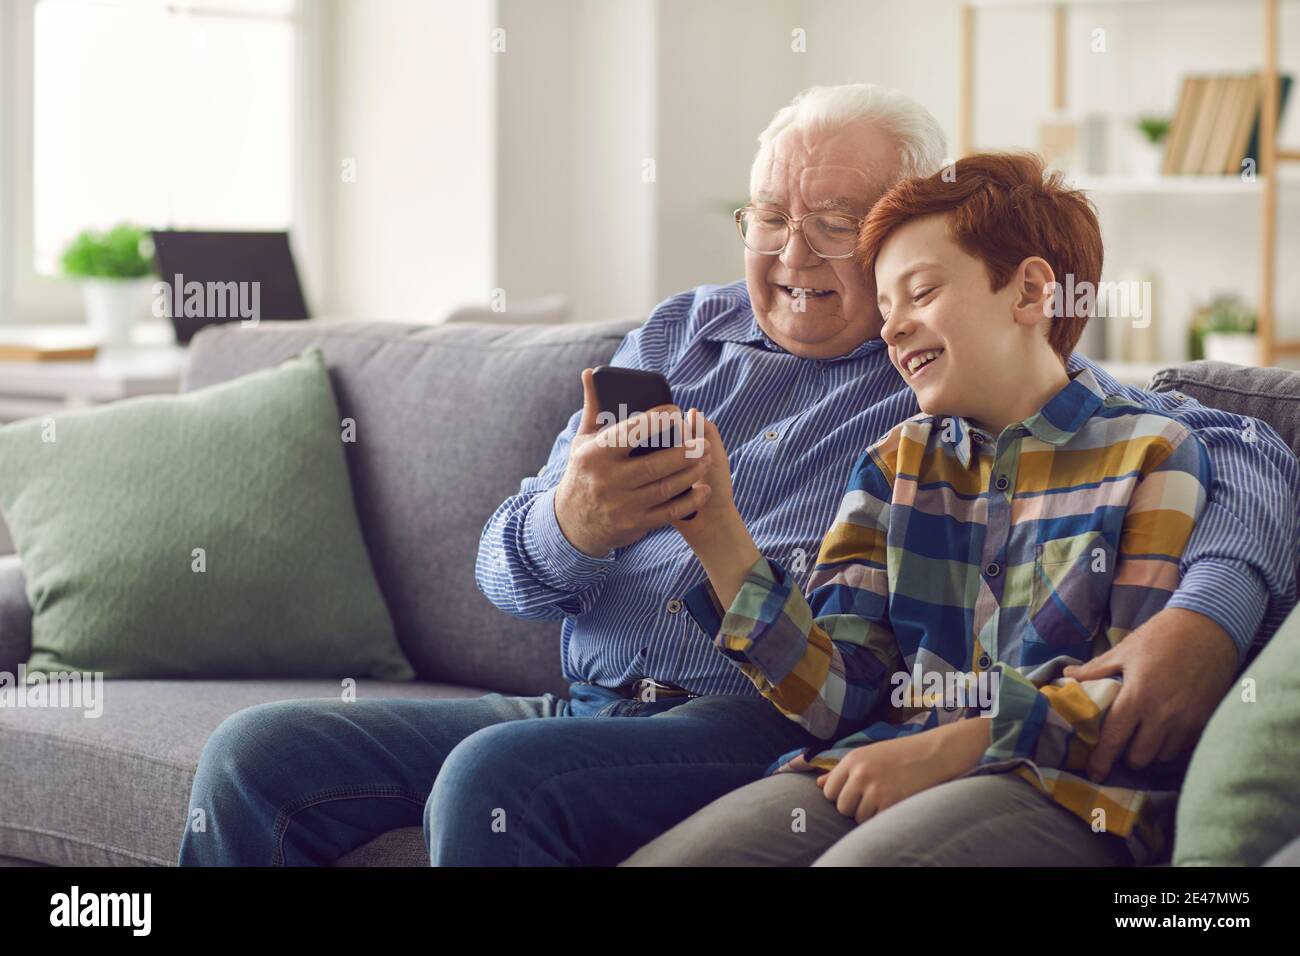 Grandson showing grandpa how to use social media or make video call on mobile phone Stock Photo